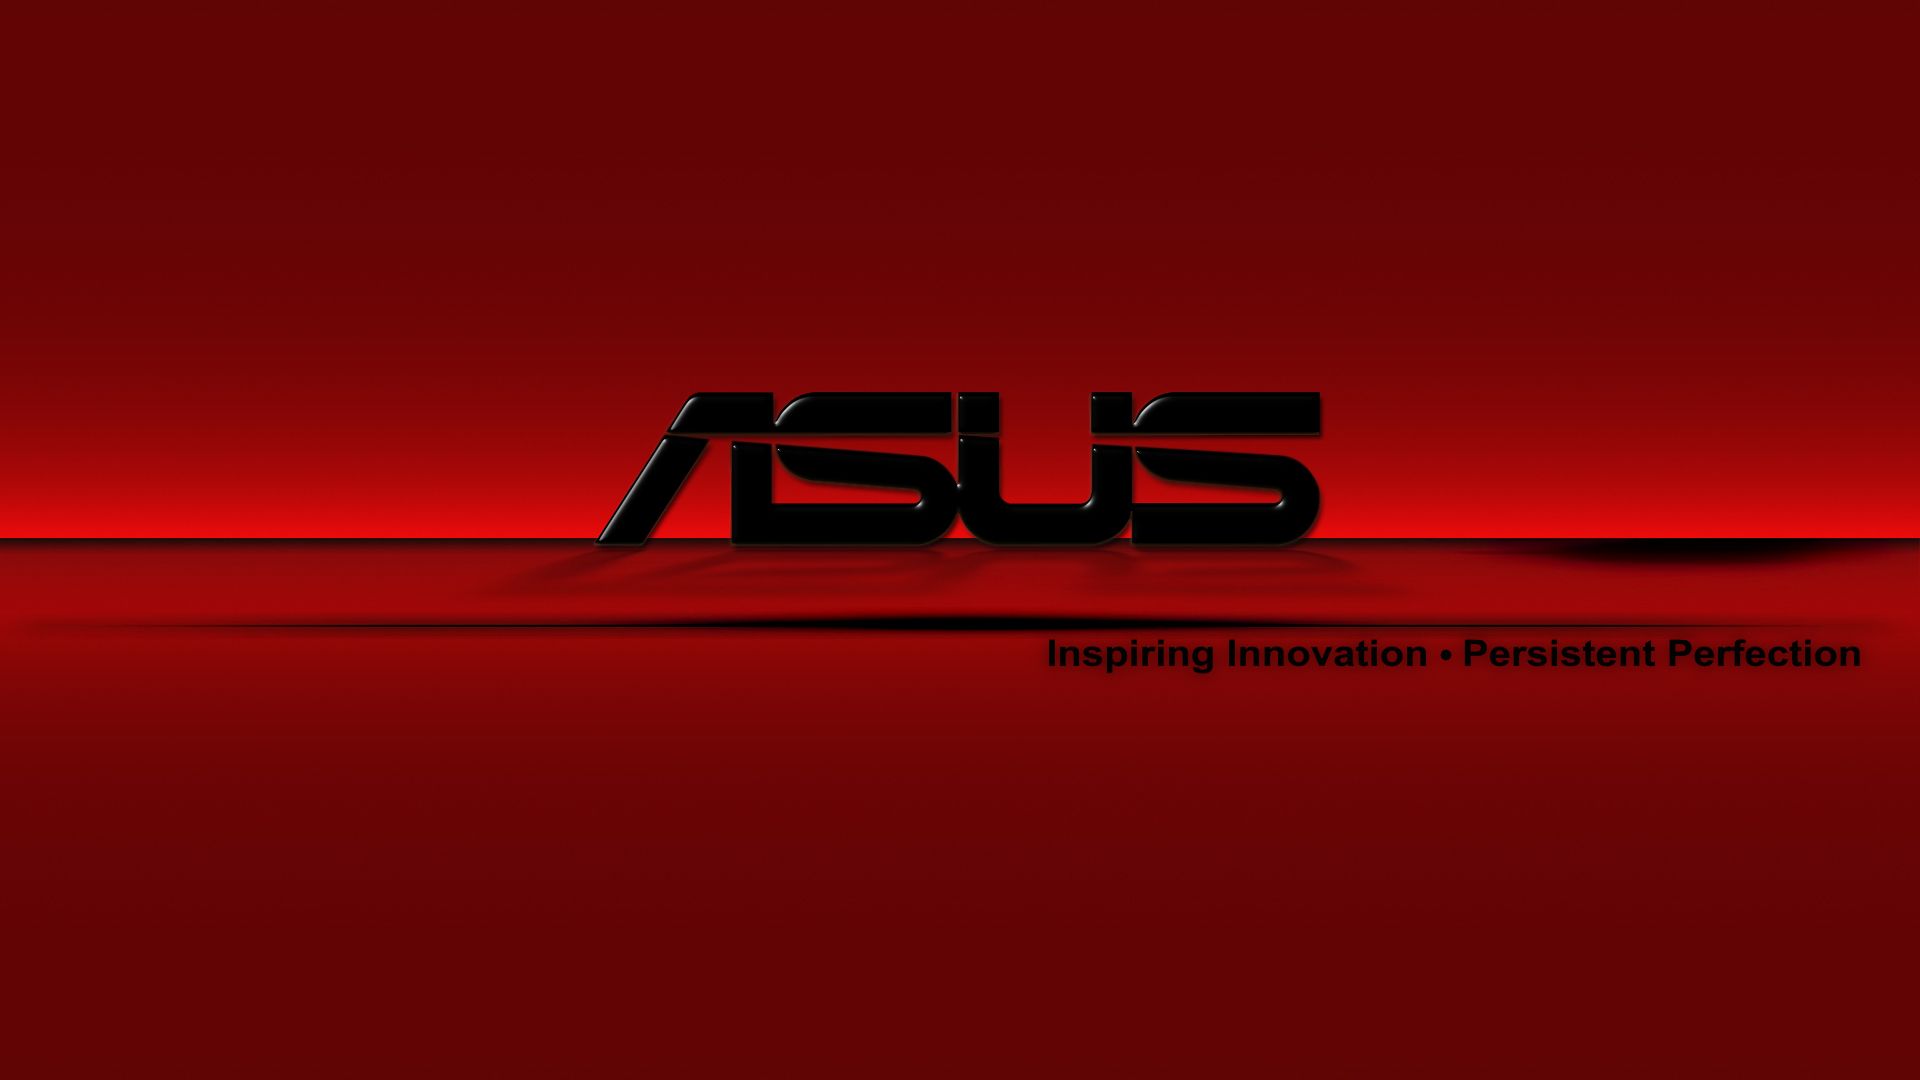 Asus Red Wallpaper. Red Christmas Wallpaper, Red Victorian Wallpaper and Red Wallpaper